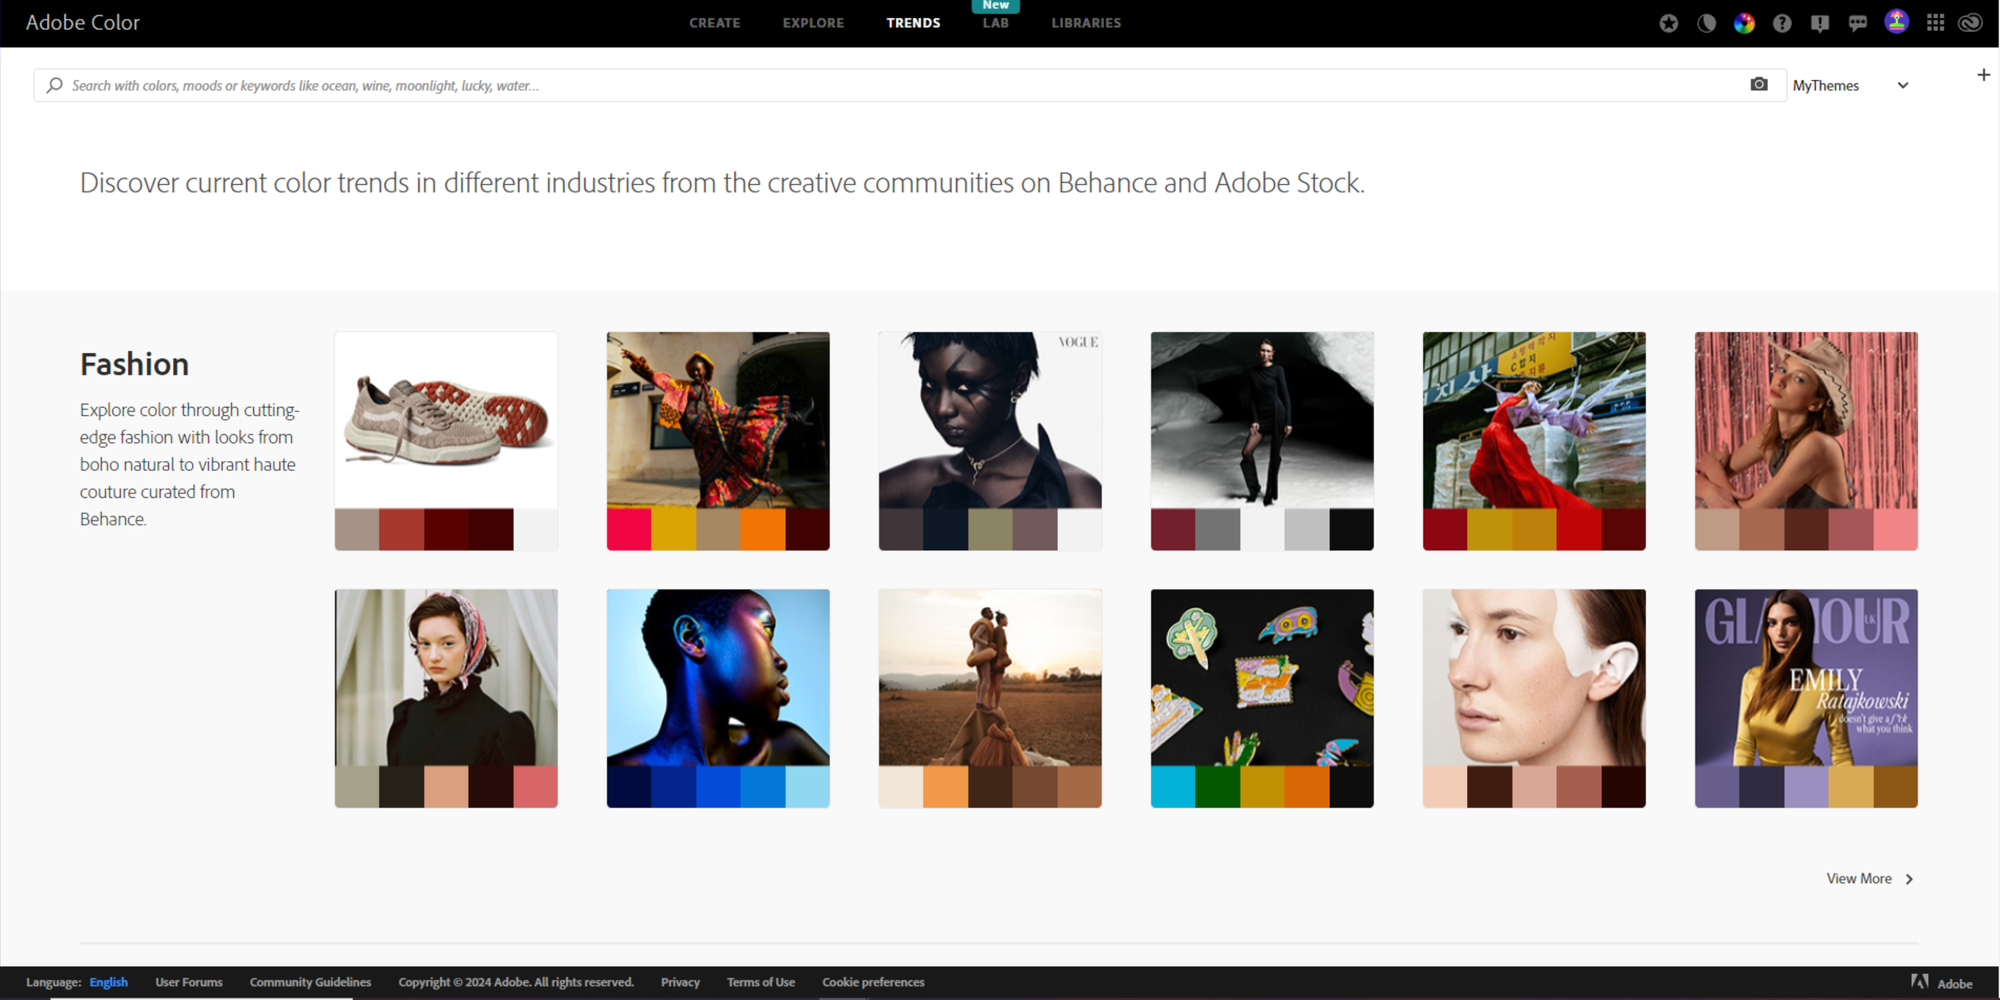 image of Adobe Color interface